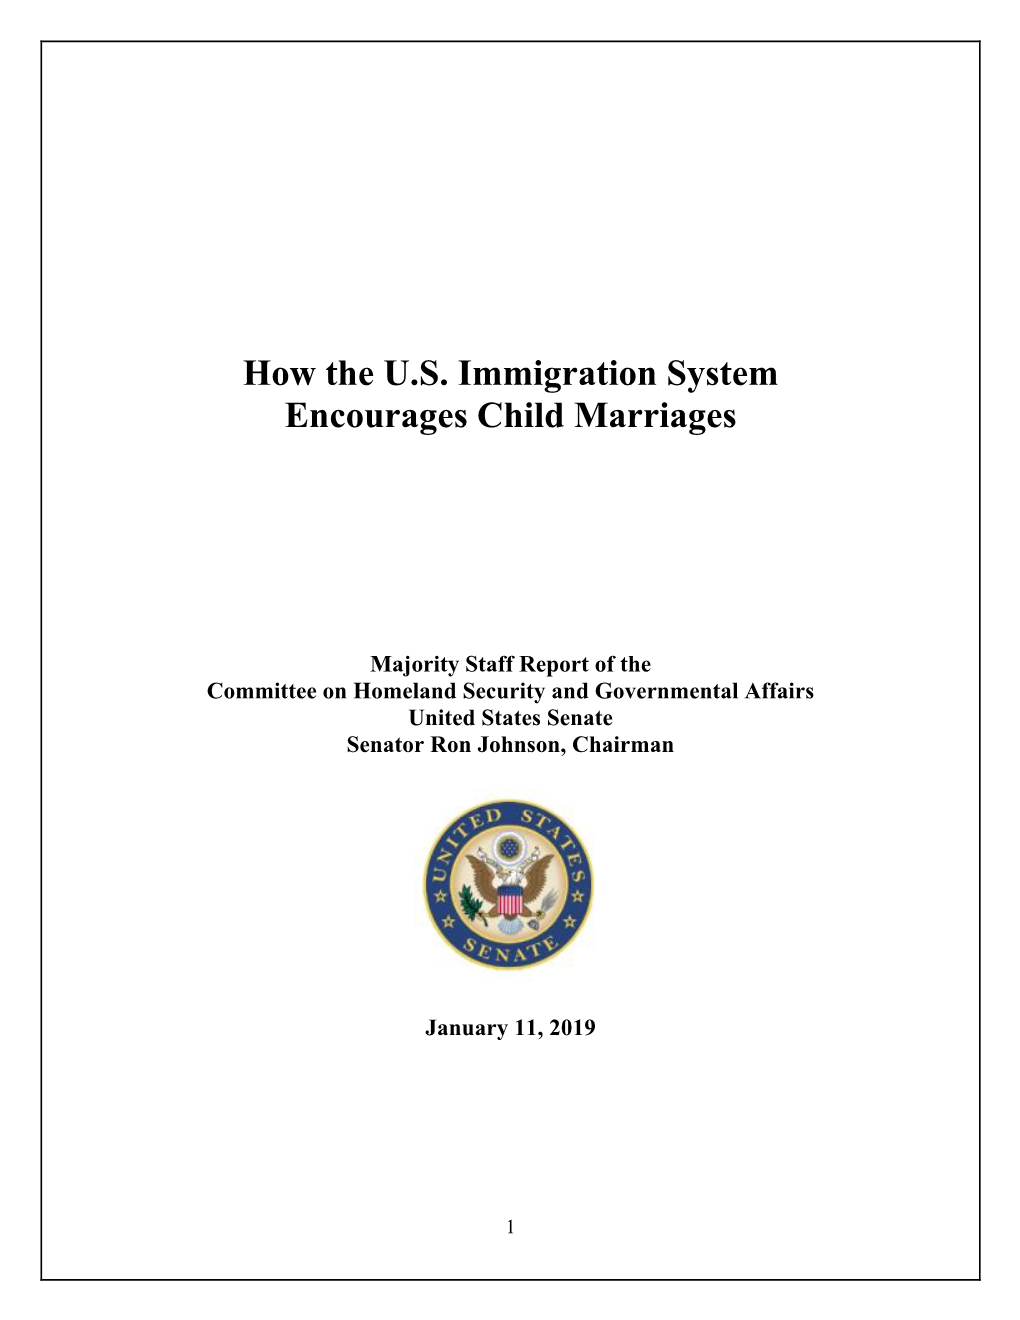 How the U.S. Immigration System Encourages Child Marriages